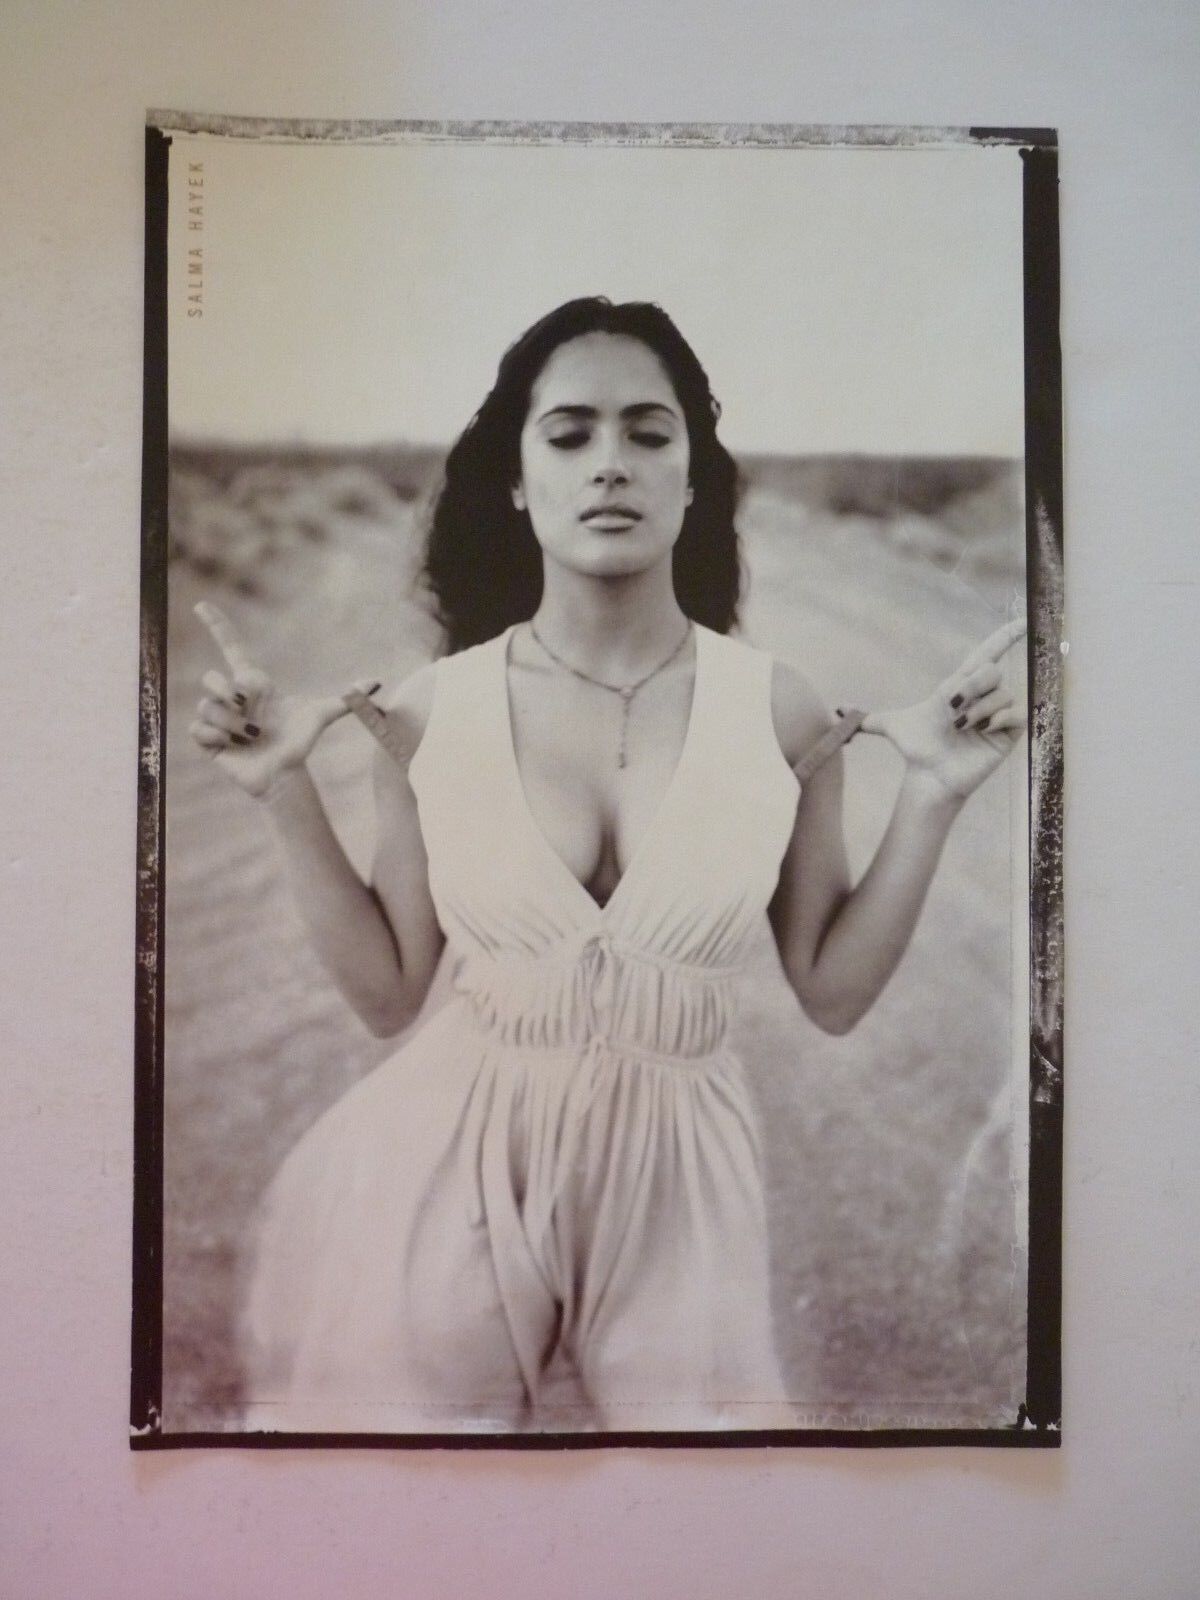 Salma Hayek KD Lang Double Sided Coffee Table Book Photo Poster painting Page 9x13